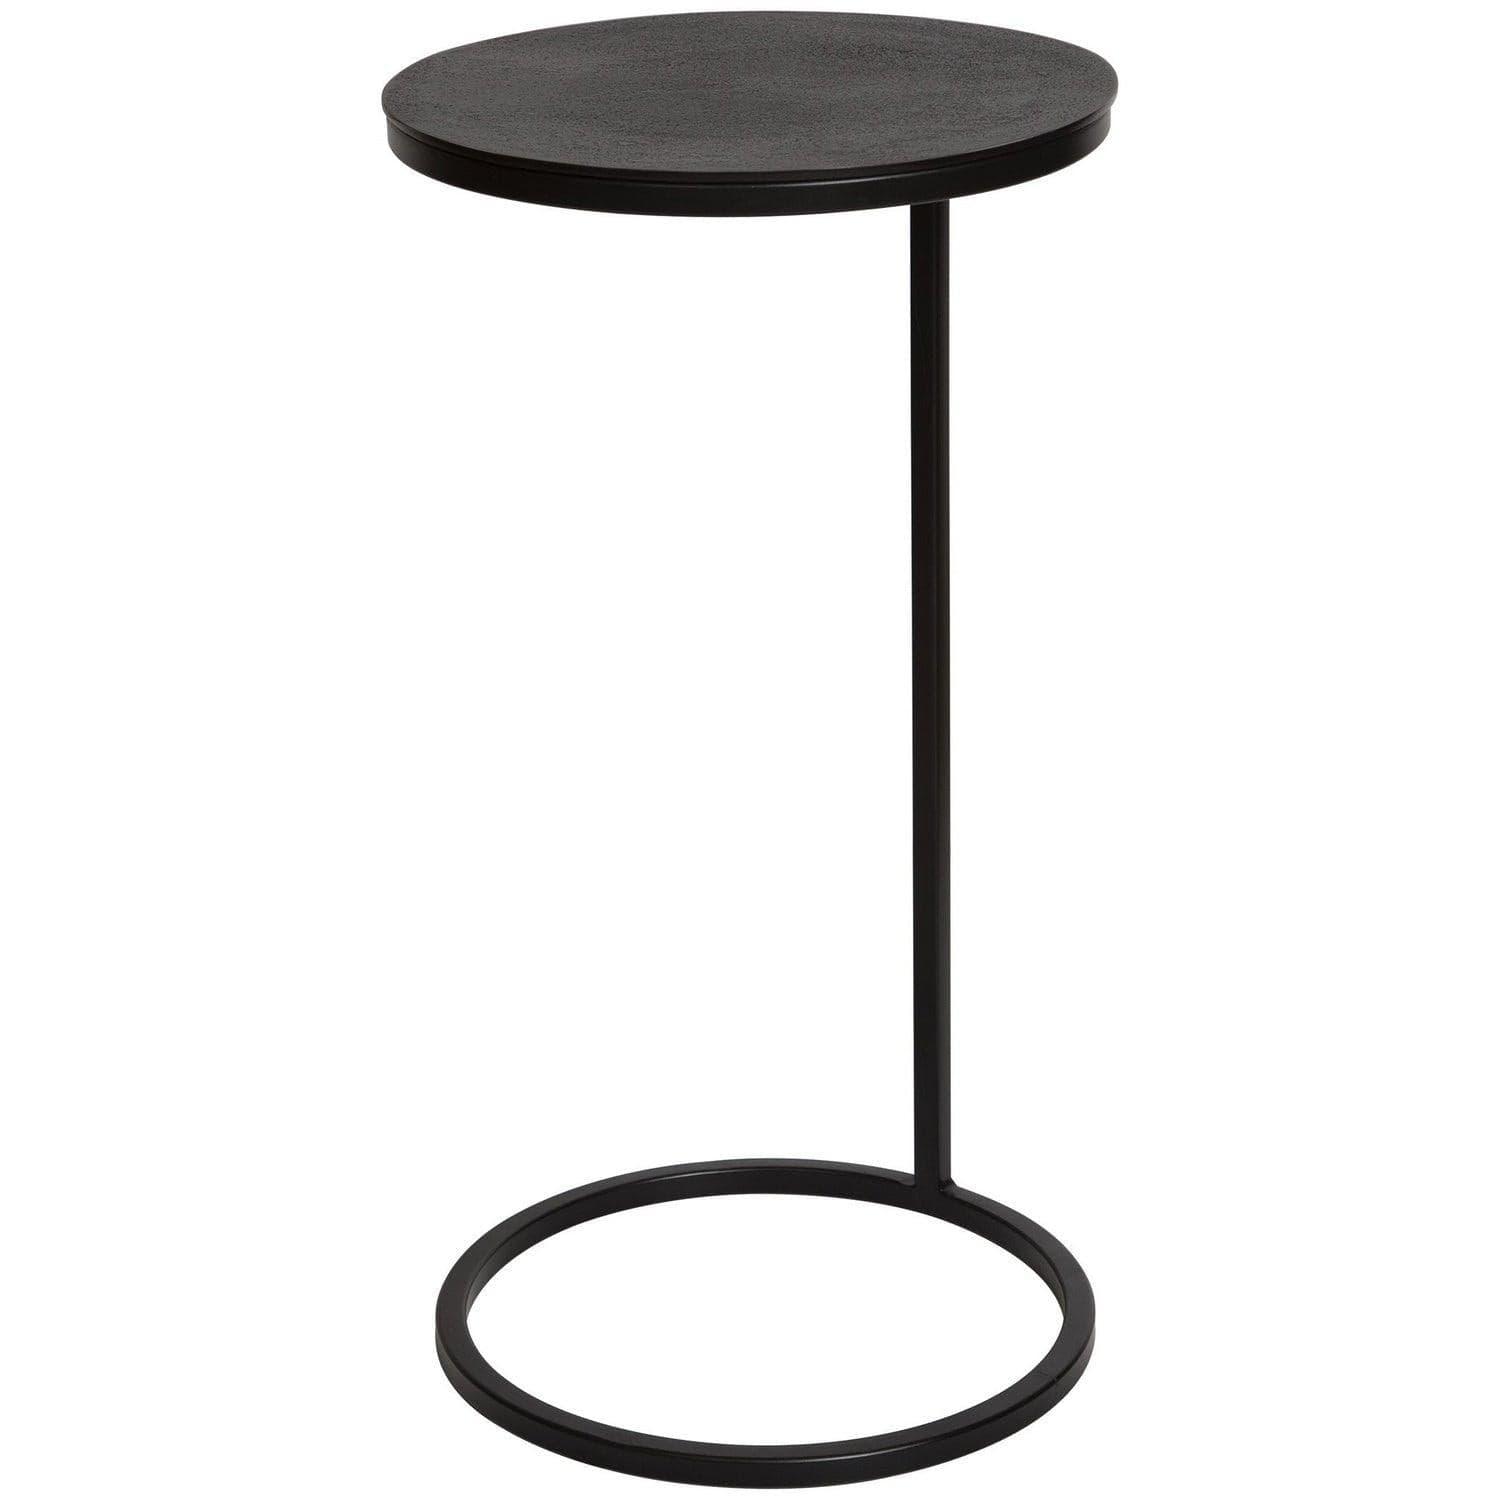 The Uttermost - Brunei Accent Table - 25137 | Montreal Lighting & Hardware